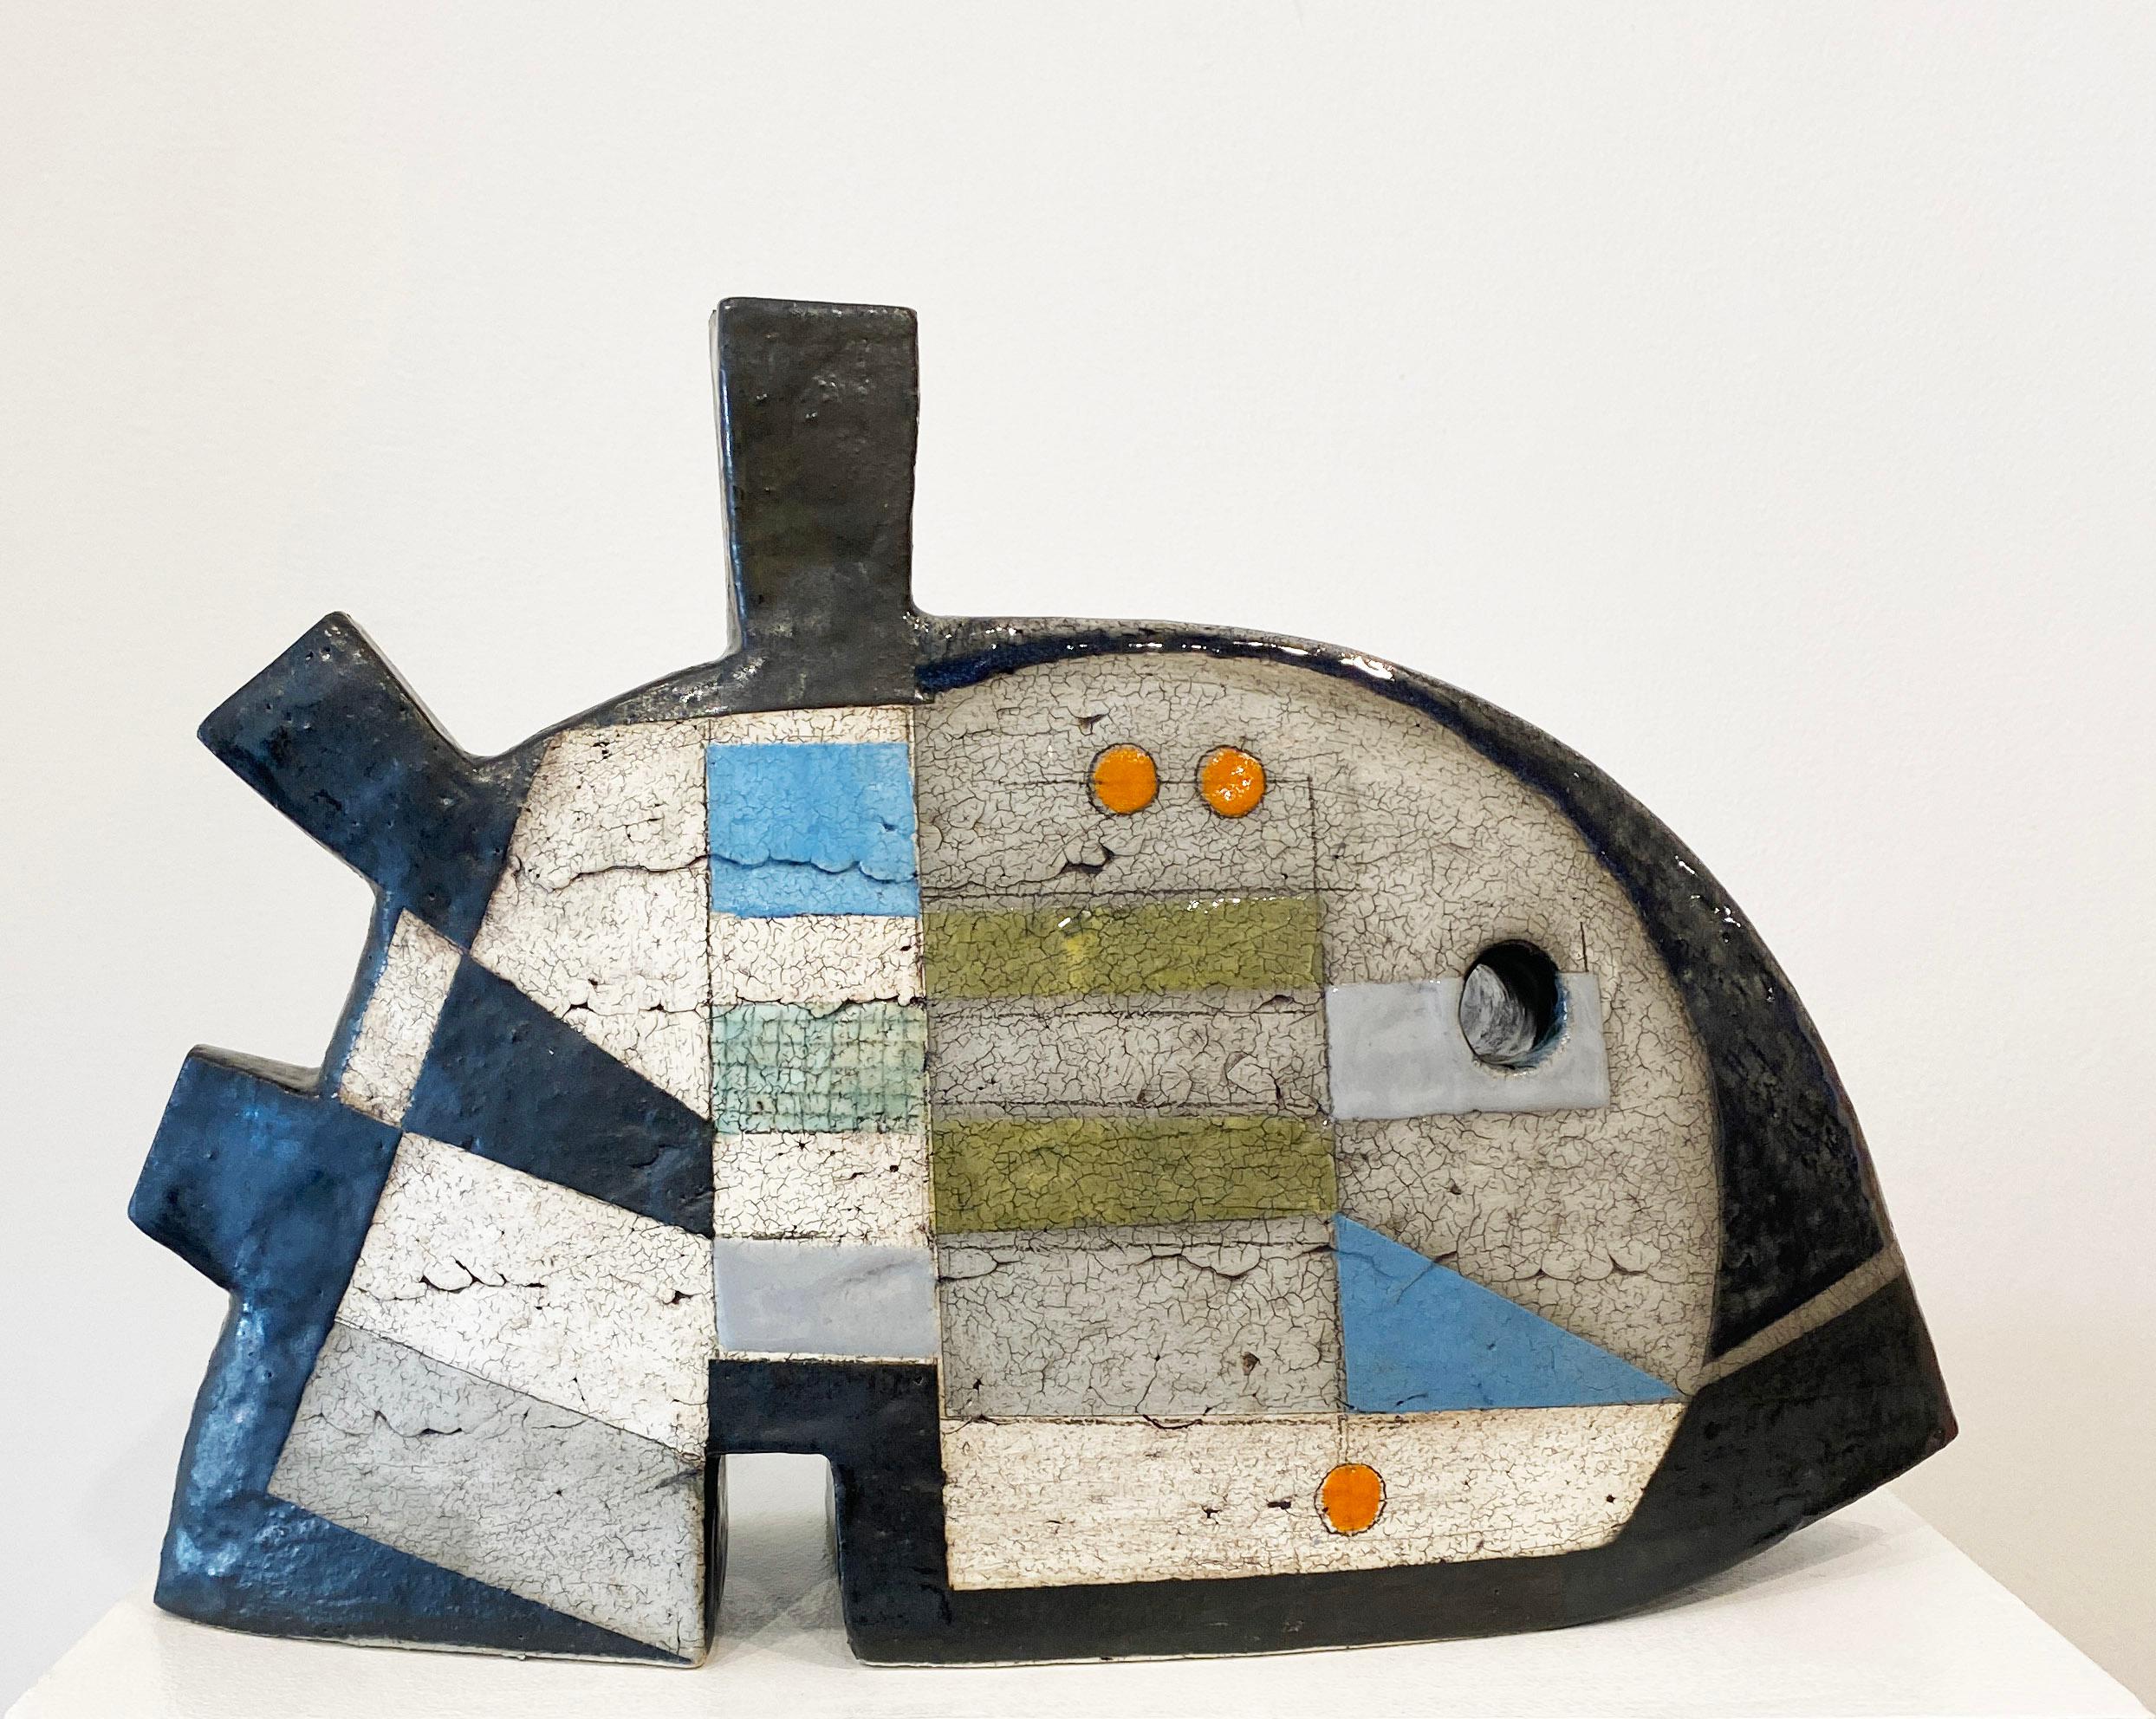 Contemporary Abstract sculpture, Sheryl Zacharia, Seaworthy 2